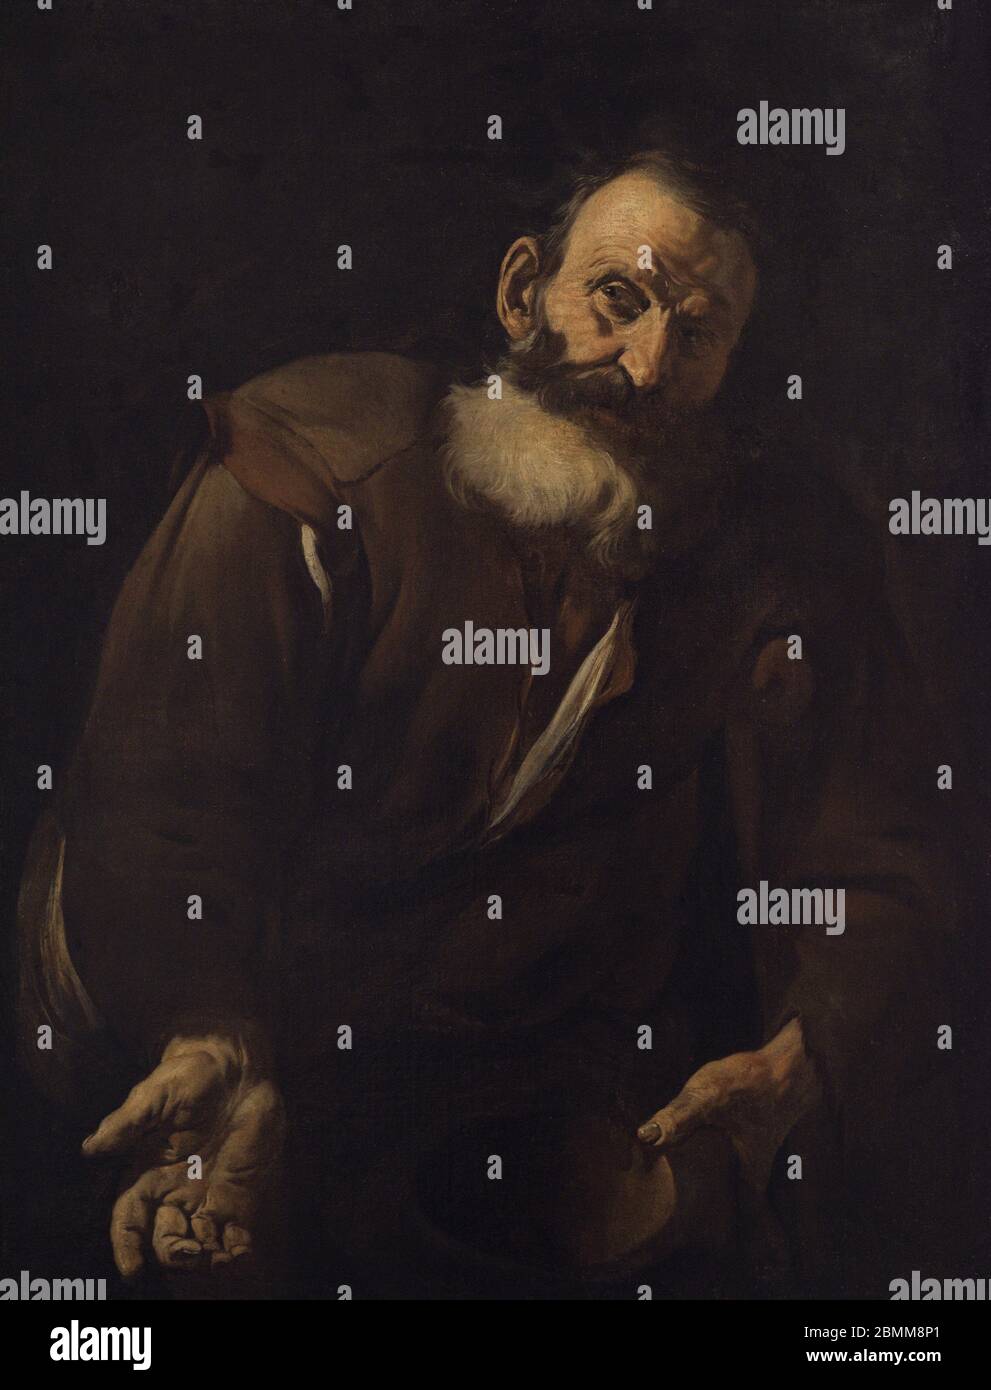 Giacomo Francesco Cipper, called Il Todeschini (1664-1736). Austrian painter. A beggar. Oil on canvas. Depiction of a bearded old beggar leaning over a crutch, with a hat in his hand begging for food or money. National Museum of Fine Arts. Valletta. Malta. Stock Photo